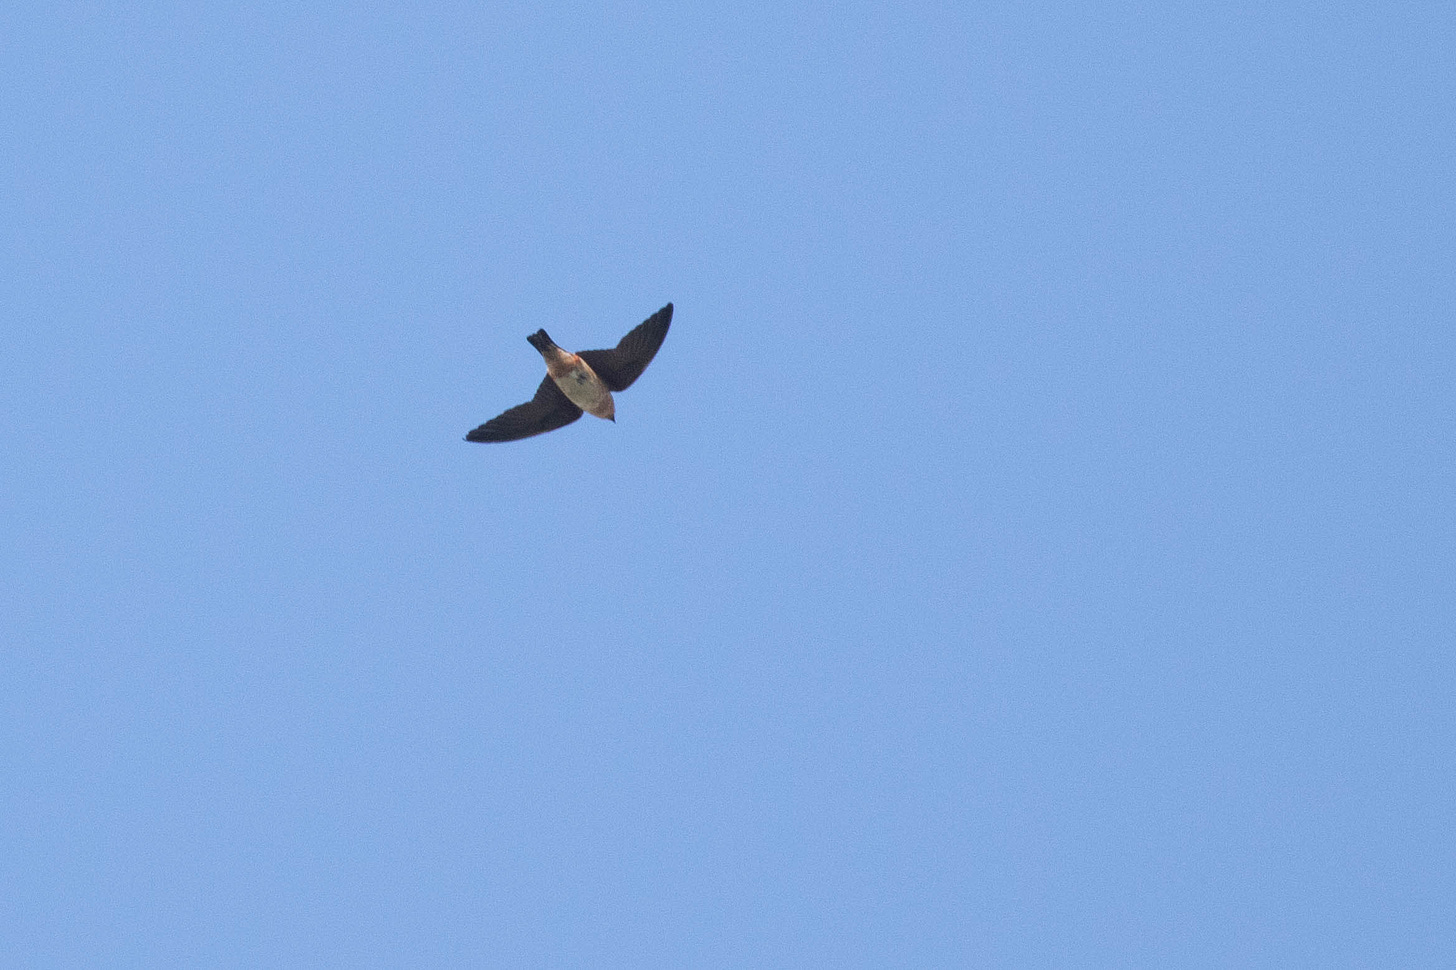 a white bellied swallow with a rusty undertail and throat flying against a blue sky